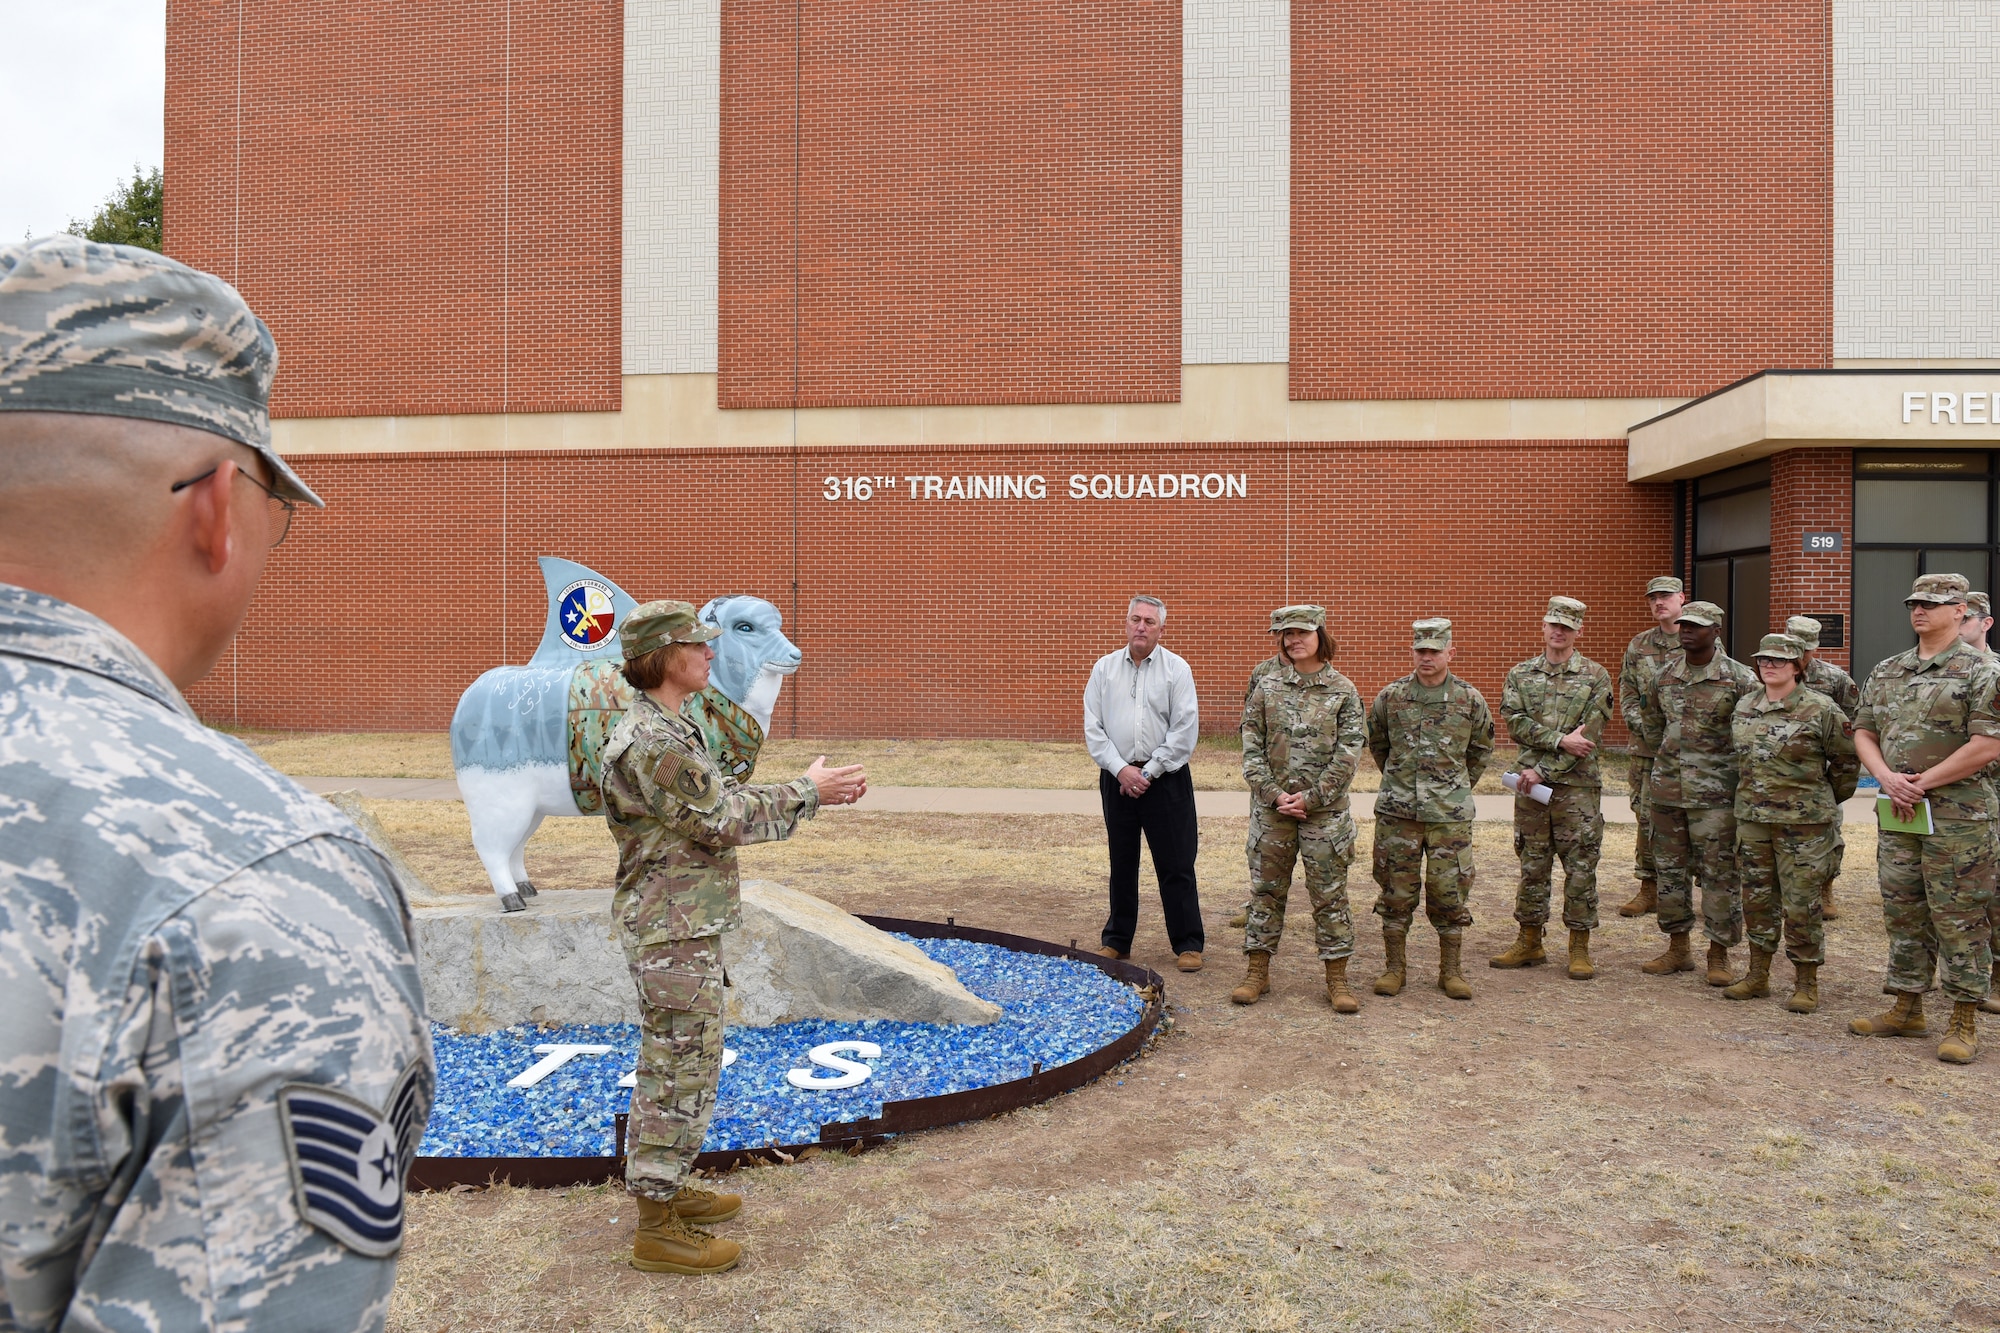 U.S. Air Force Maj. Gen. Andrea Tullos, 2nd Air Force commander, speaks to members of the 316th Training Squadron during her tour of Goodfellow Air Force Base, Texas, Nov. 21, 2019. During her tour of the 316th TRS, Tullos was shown how they are ensuring joint-force lethality in contested environments. (U.S. Air Force photo by Airman 1st Class Zachary Chapman/Released)